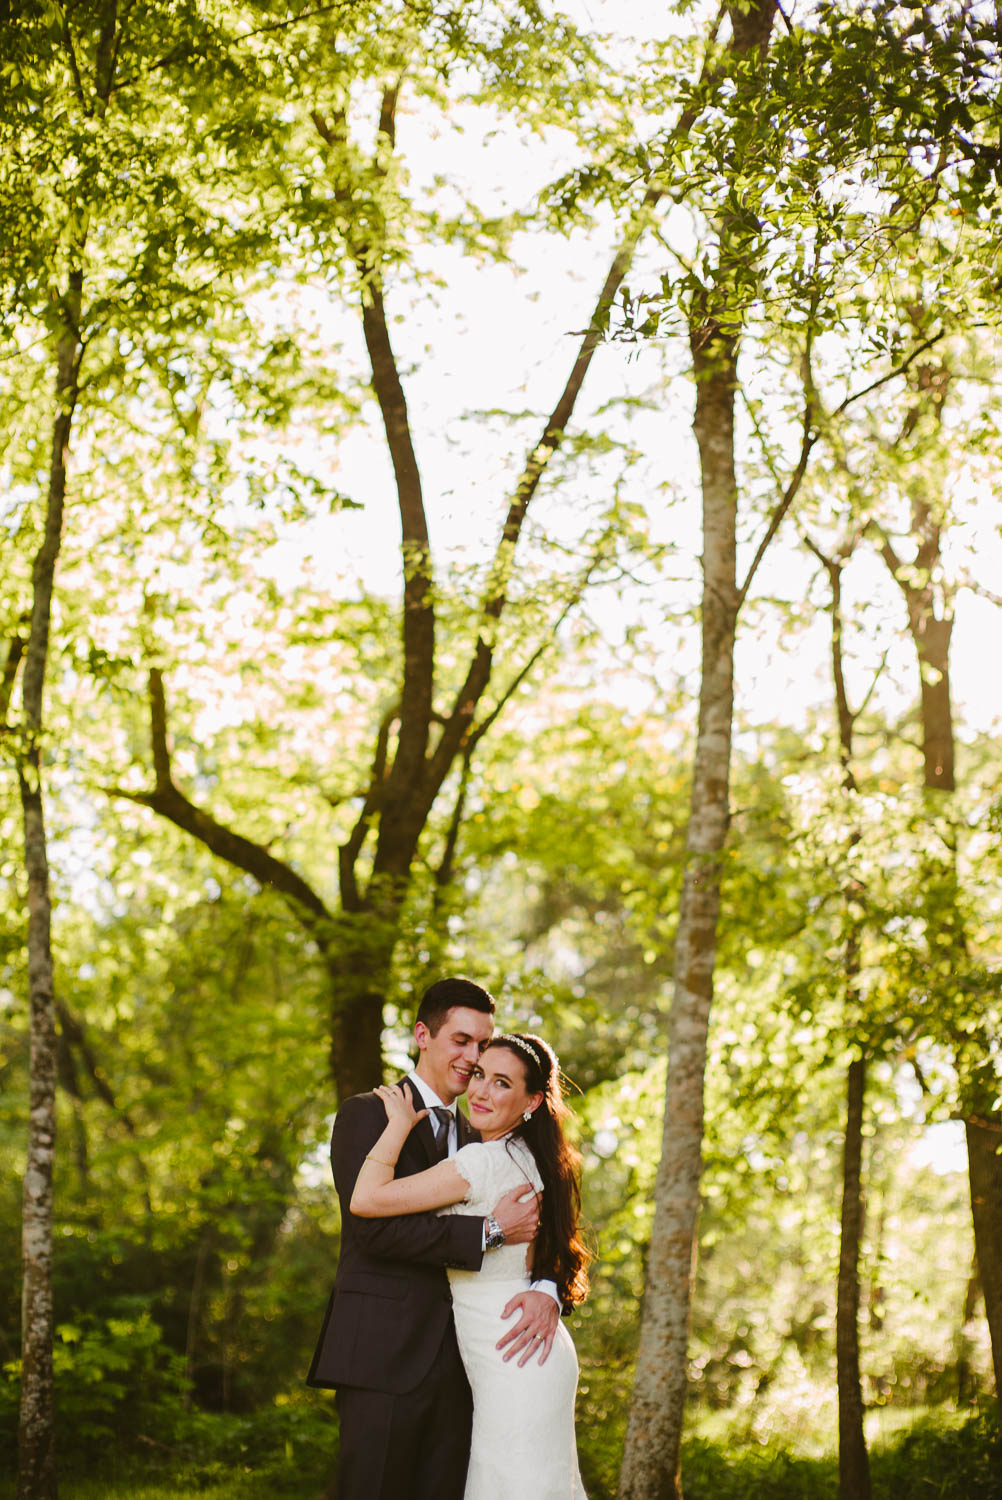 Couple Bri and Max hug in a posed image with high trees at Pecan Springs Houston Texas photo by Philip Thomas Photography